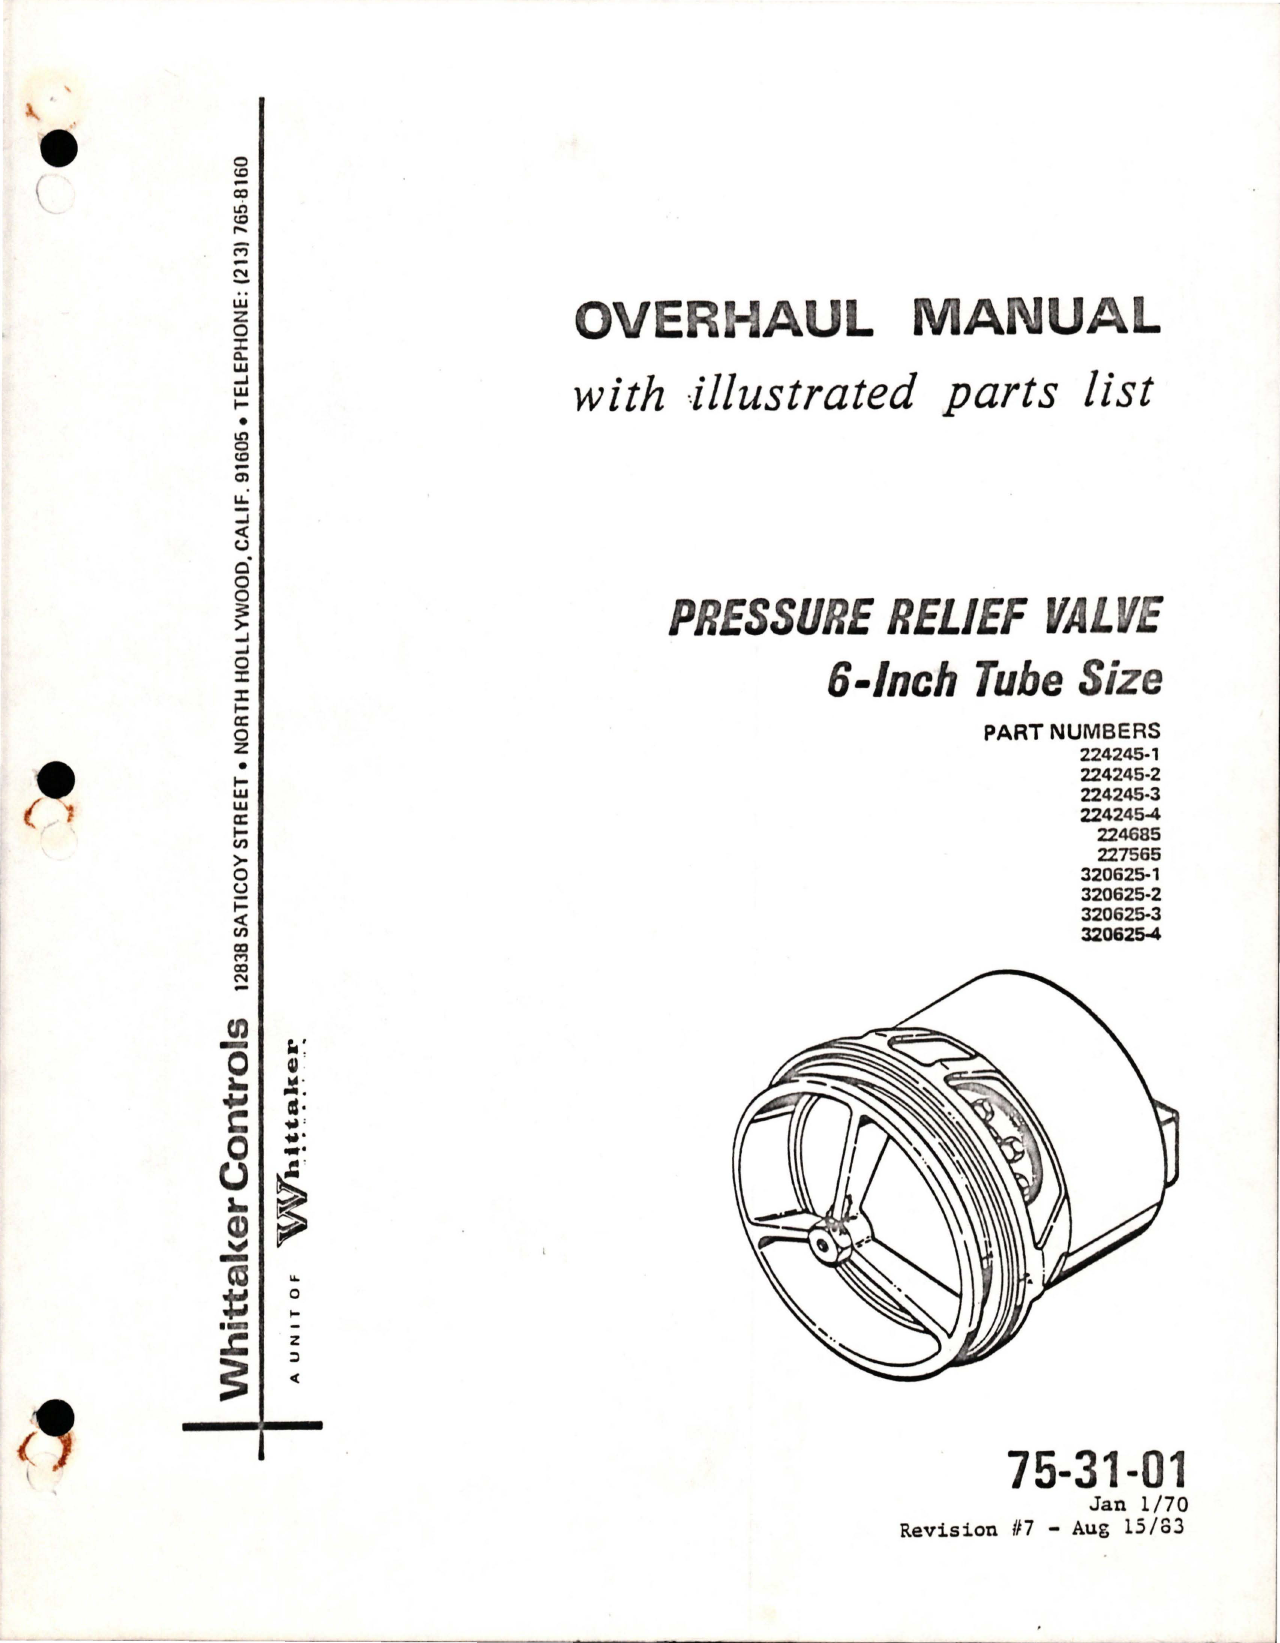 Sample page 1 from AirCorps Library document: Overhaul with Illustrated Parts List for Pressure Relief Valve - 6 inch tube size - Revision 7